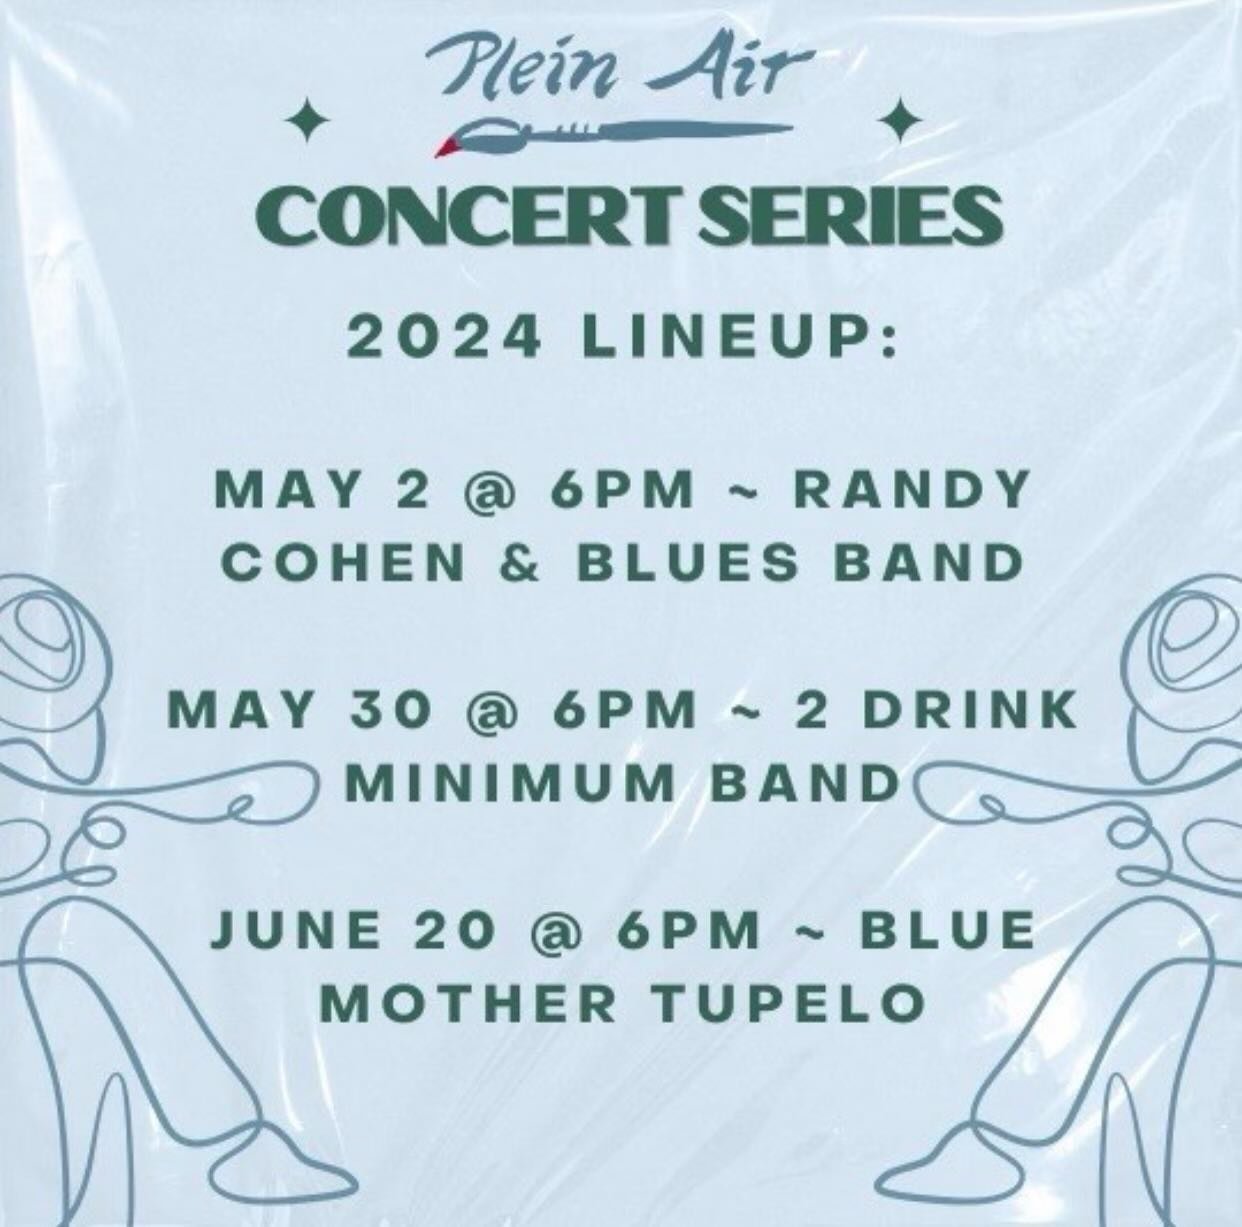 Starting tonight! Free concerts on the lawn in Plein Air. We&rsquo;ll be open until 7pm tonight with our regular menu and Pulled Pork Nachos! 😋

#pleinair #taylorms #oxfordms #freeconcerts #offbeatgeneralstore